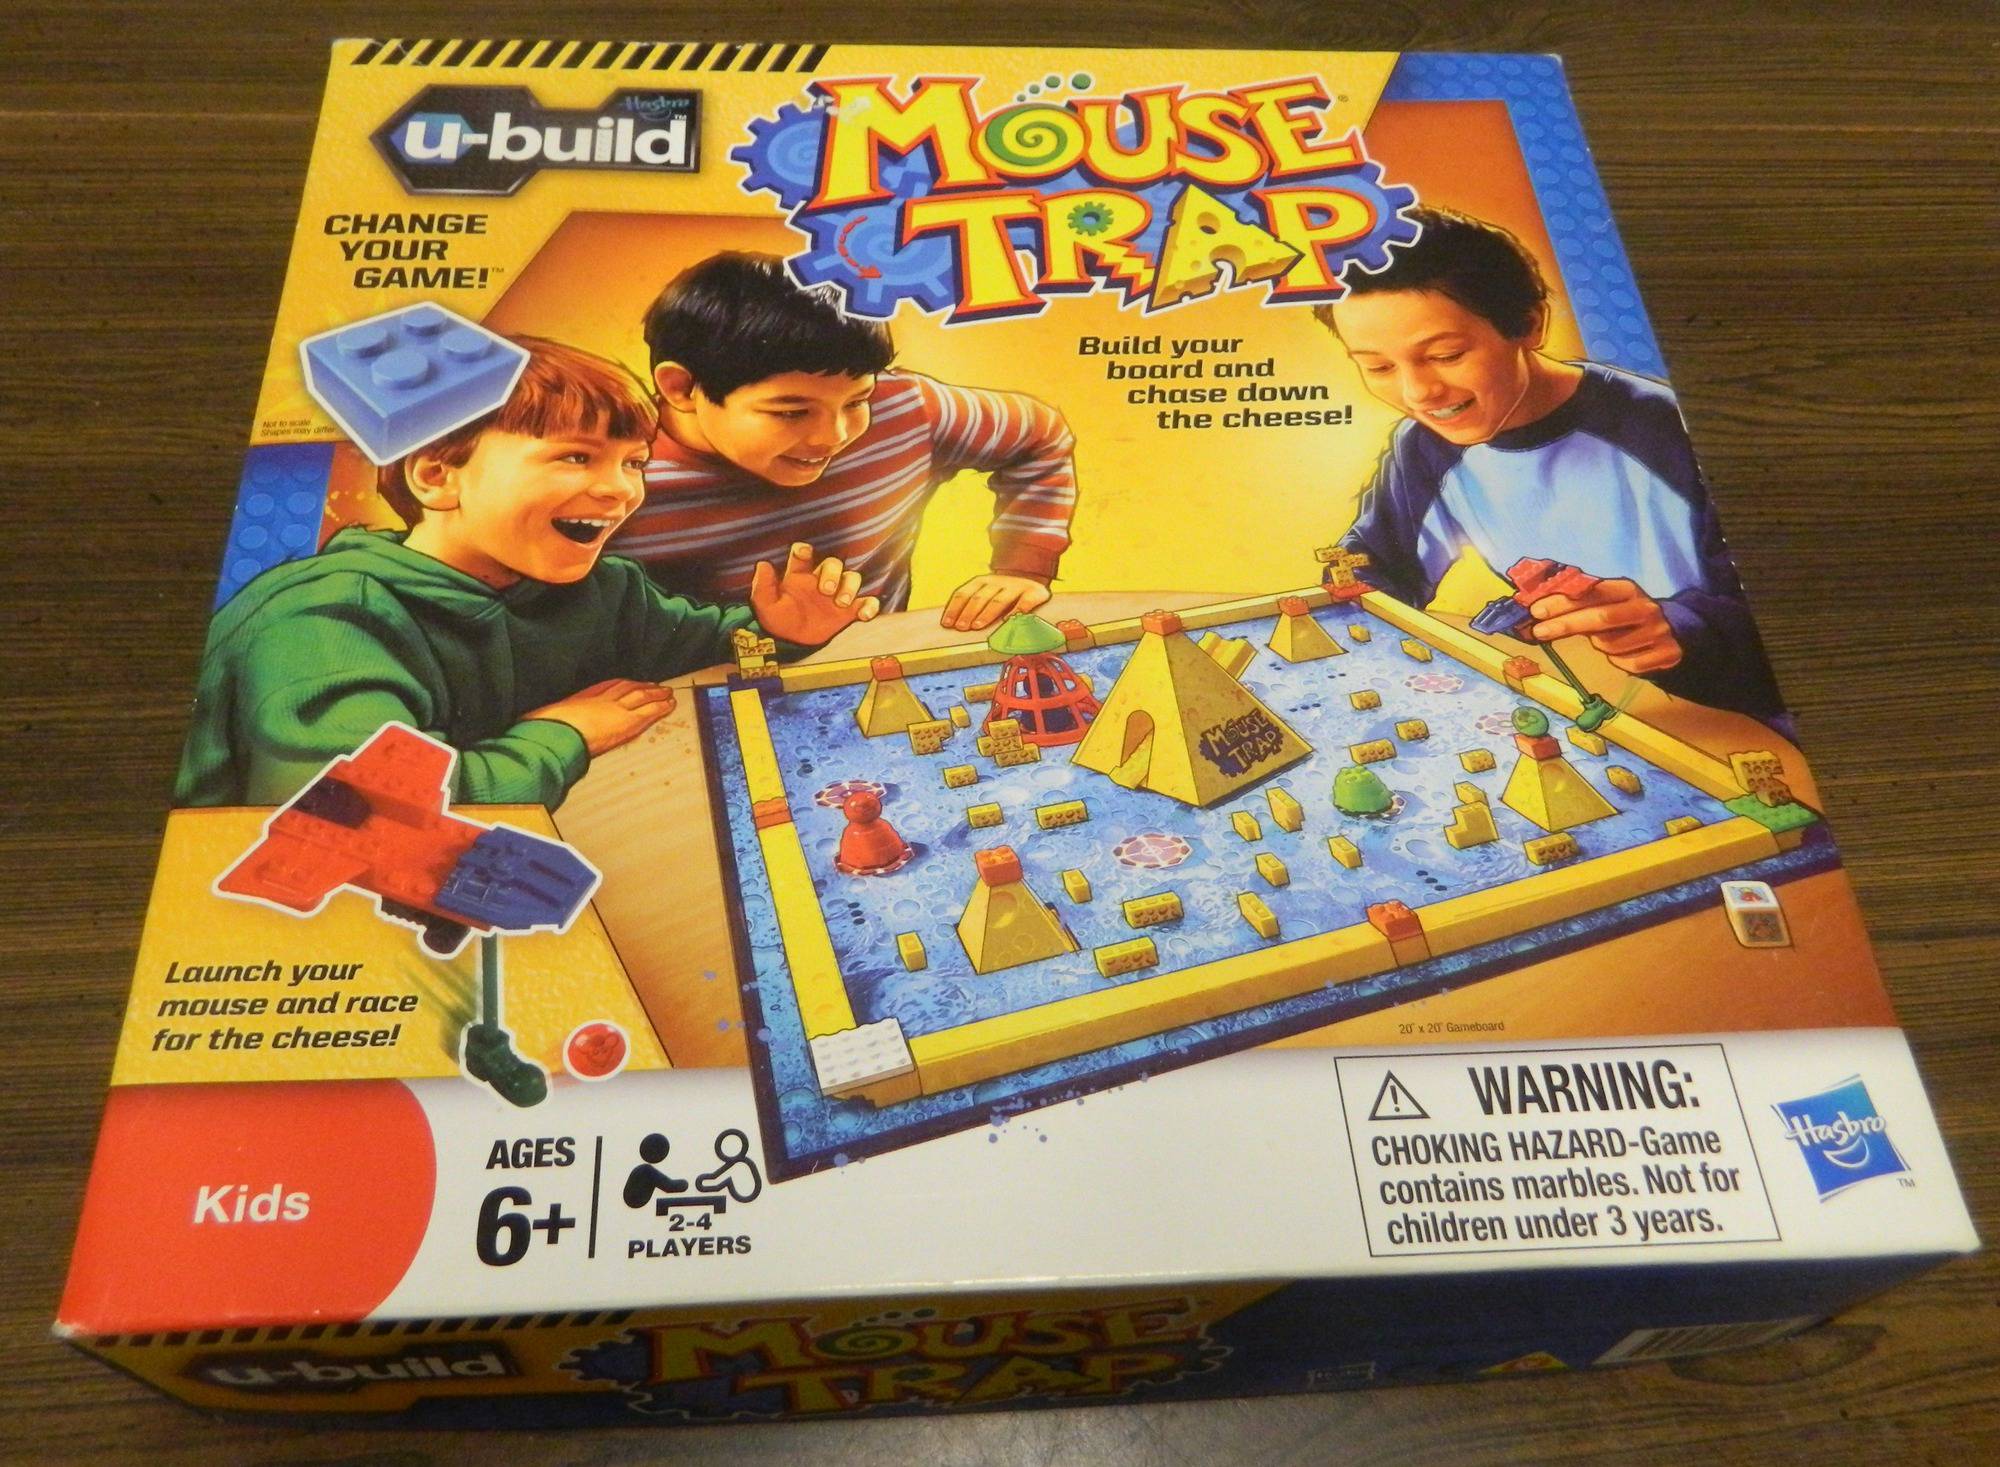 U Build Mouse Trap Board Game Review and Rules Geeky Hobbies